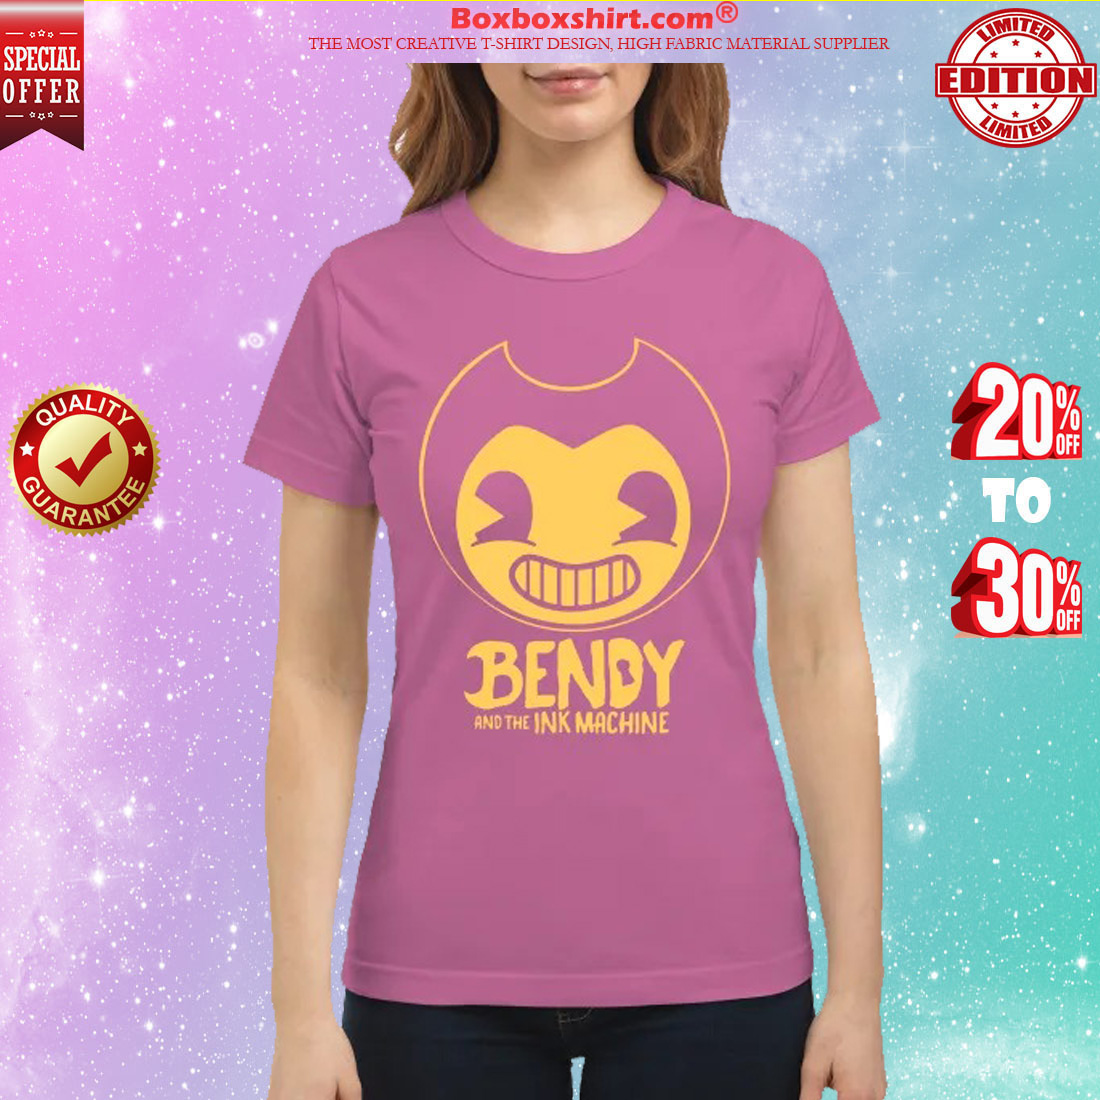 Bendy and the ink machine classic shirt